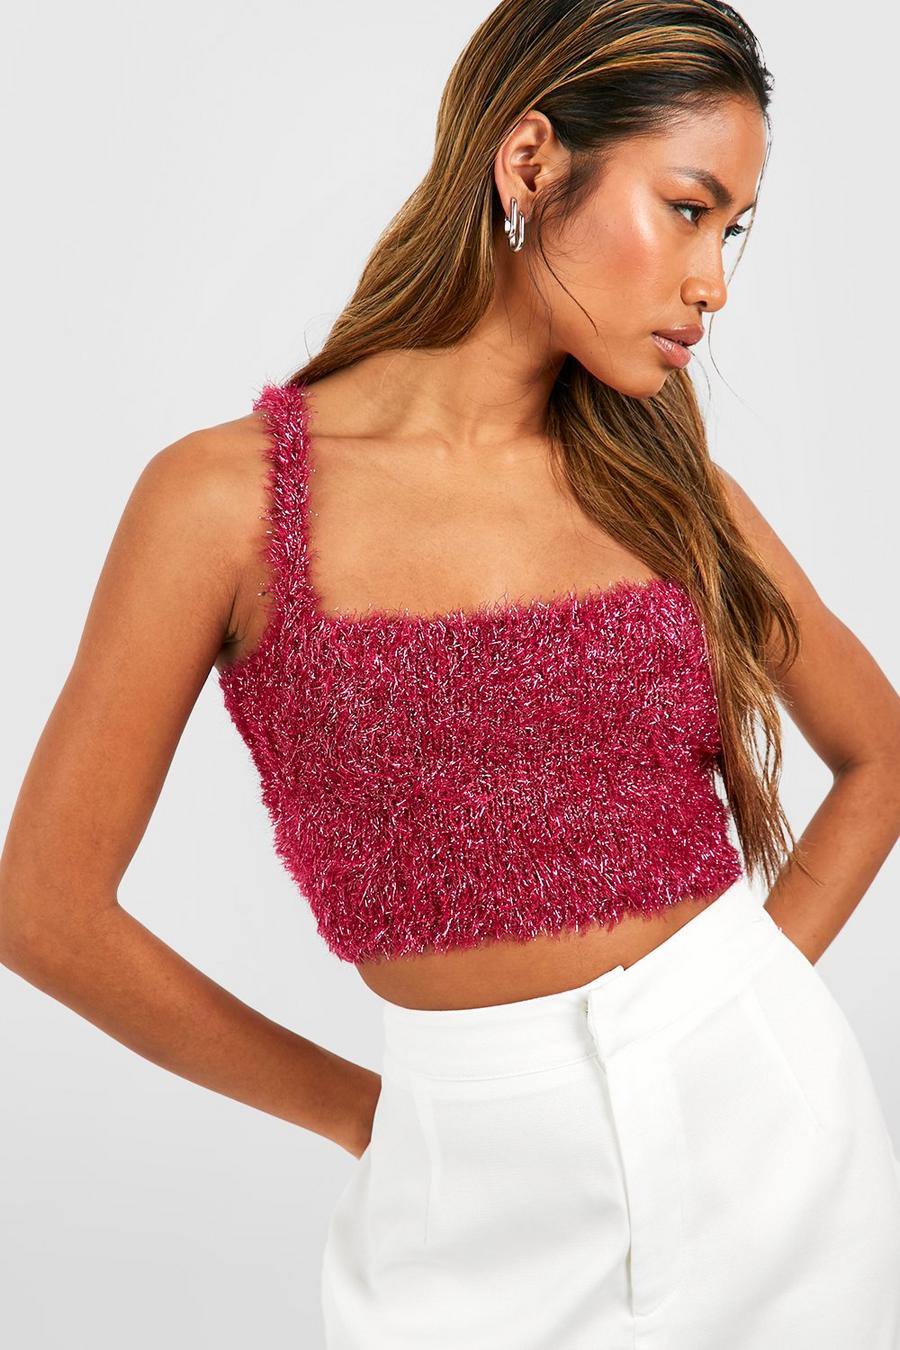 6+ Knit Tops For Women